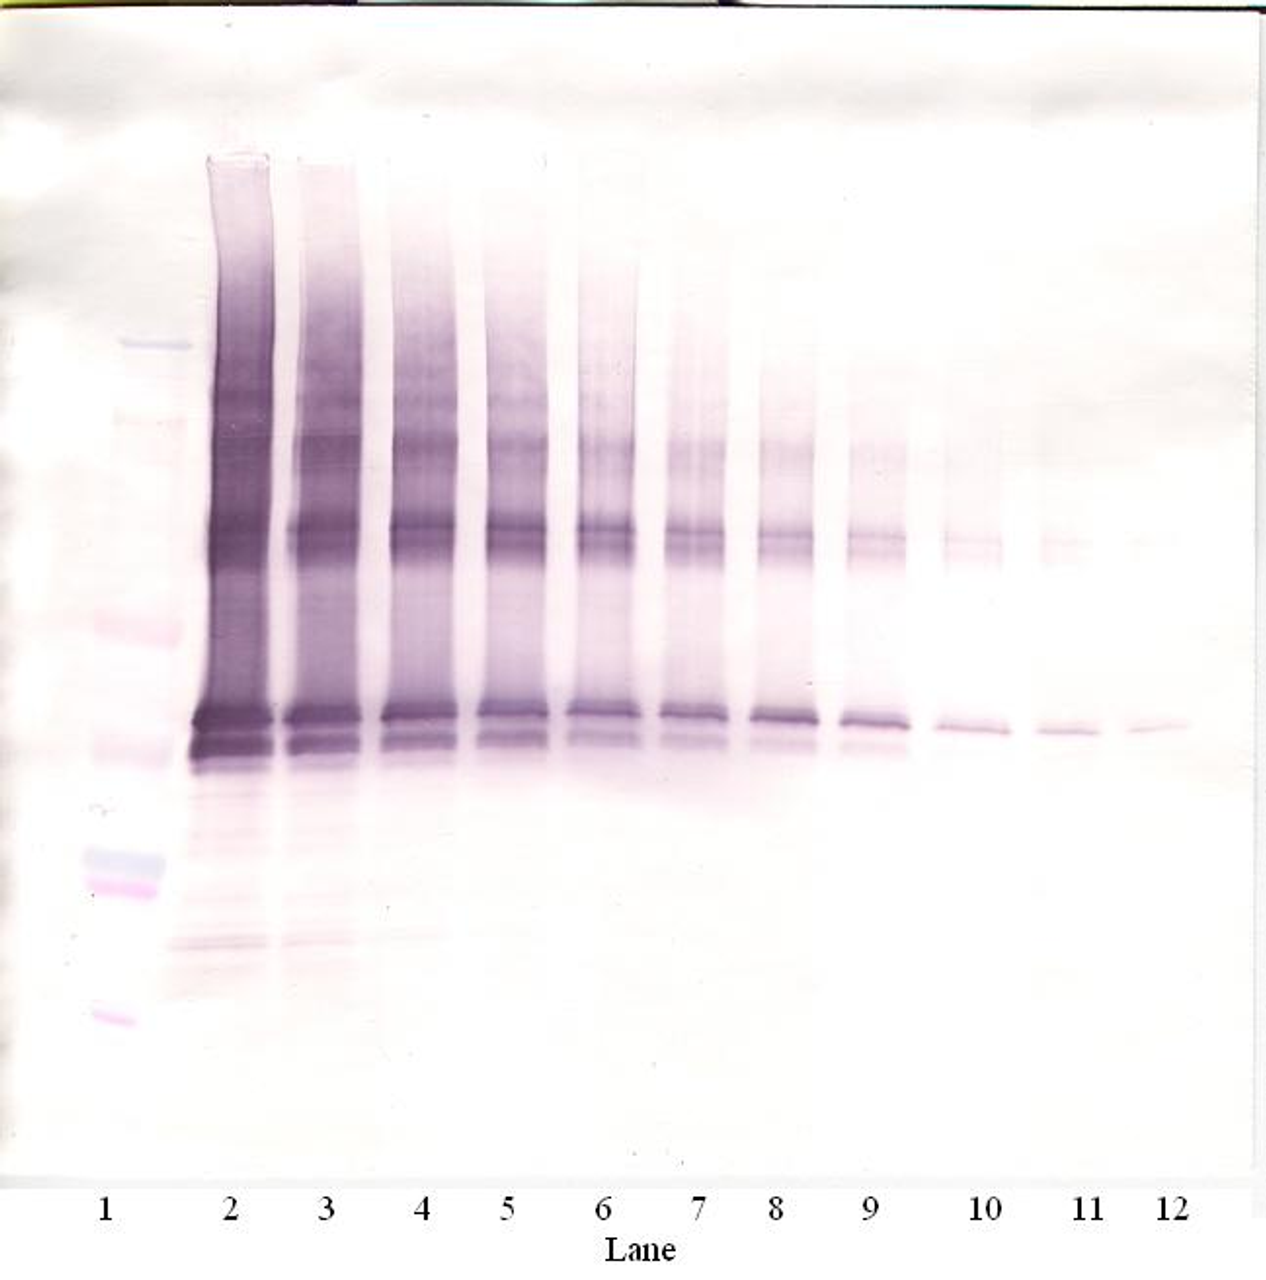 To detect hNanog by Western Blot analysis this antibody can be used at a concentration of 0.1 - 0.2 ug/ml. Used in conjunction with compatible secondary reagents the detection limit for recombinant hNanog is 1.5 - 3.0 ng/lane, under either reducing or non-reducing conditions.